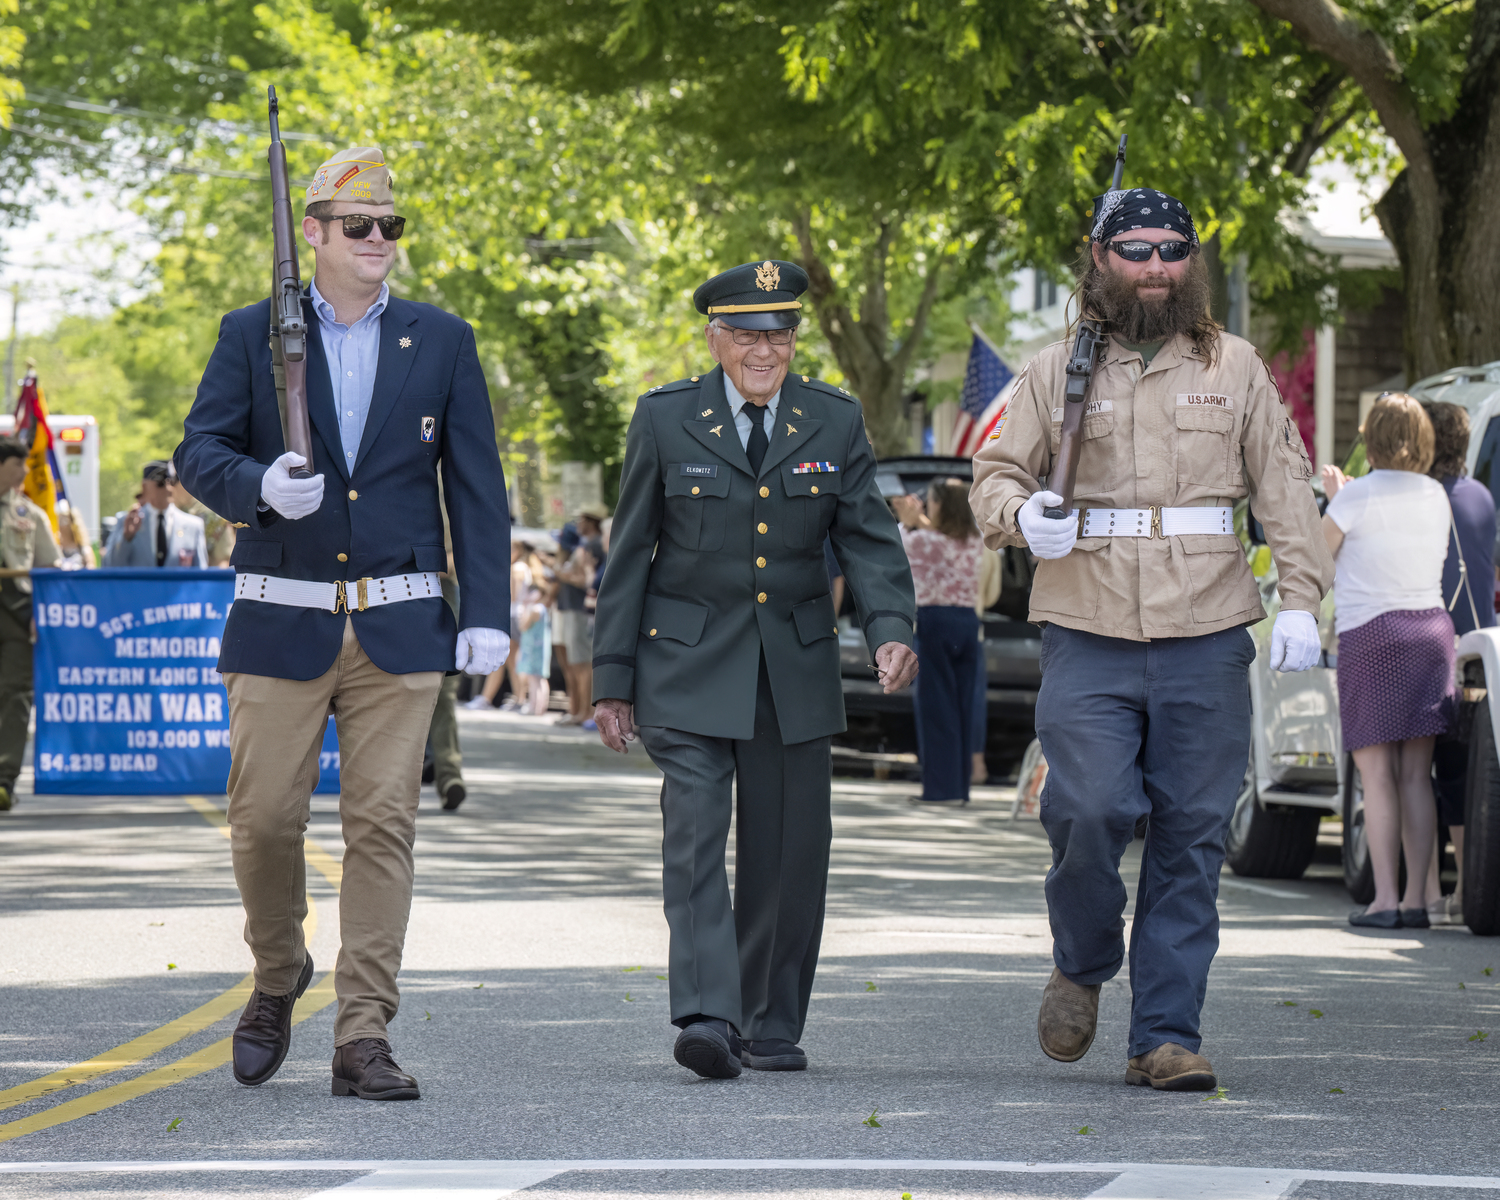 The Memorial Day parade in Southampton Village on Monday.